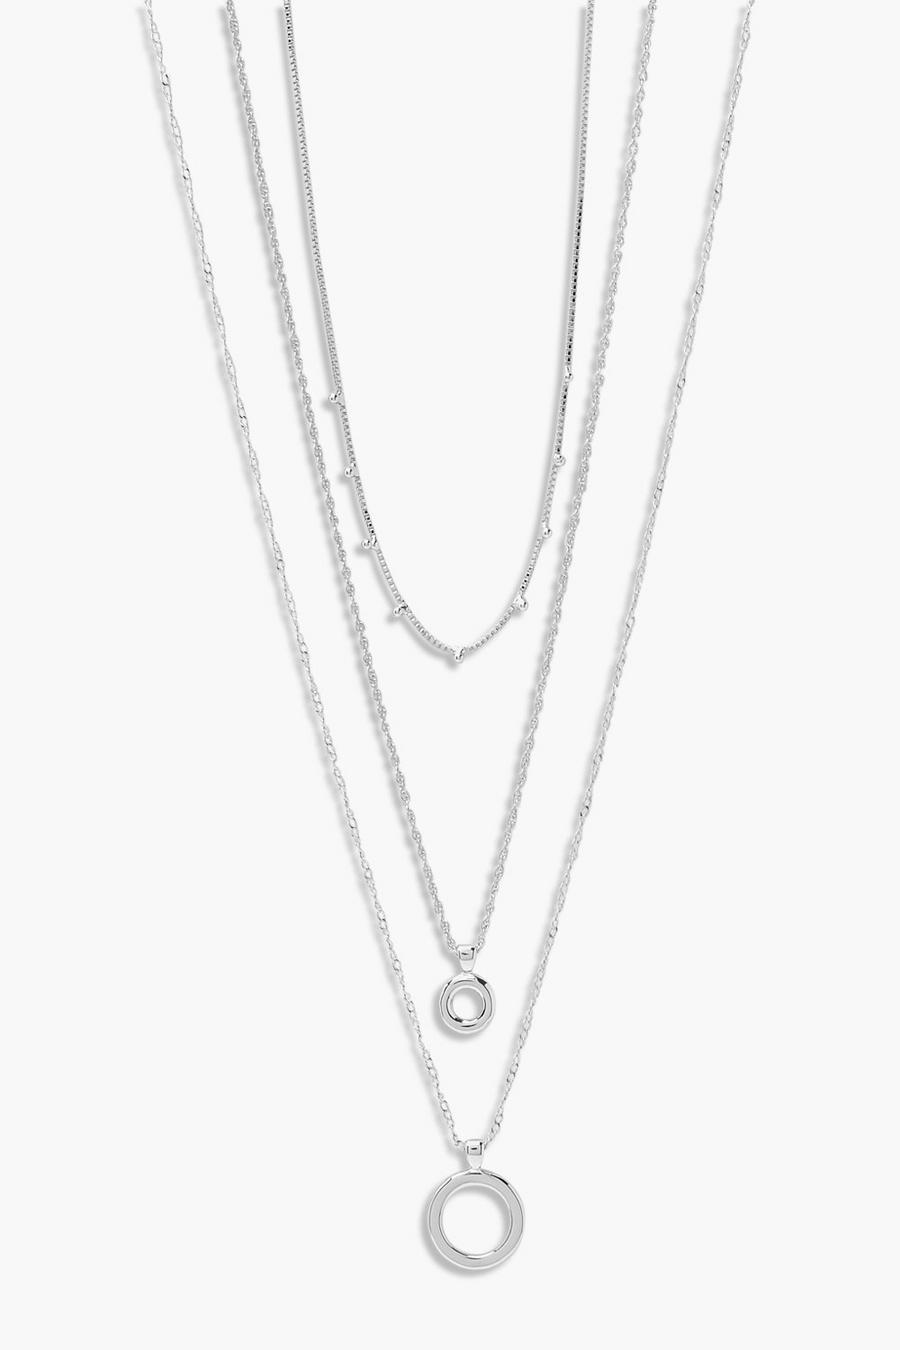 Silver Double Disk Pendant Layered Necklace